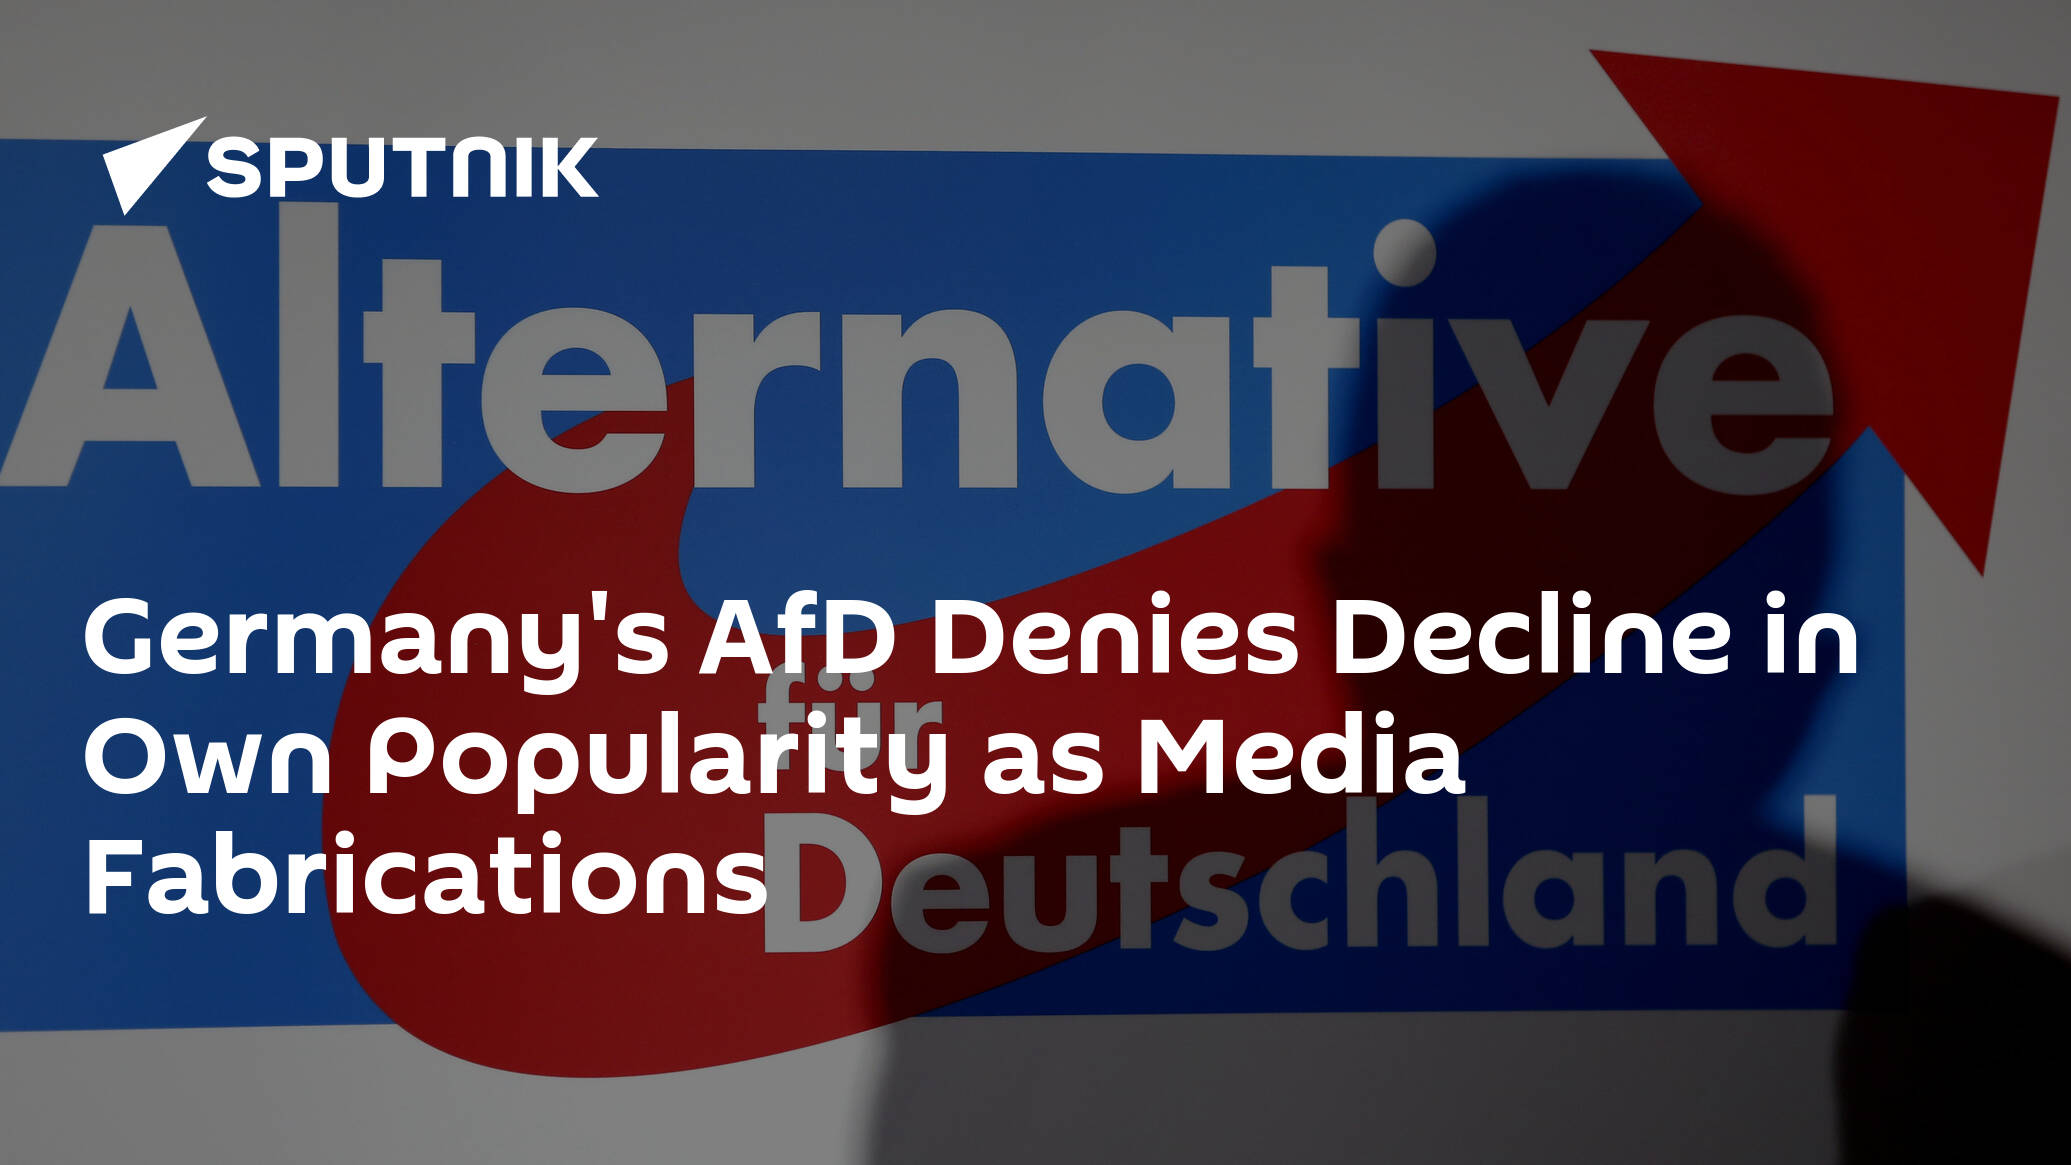 Germany's AfD Denies Decline in Own Popularity as Media Fabrications